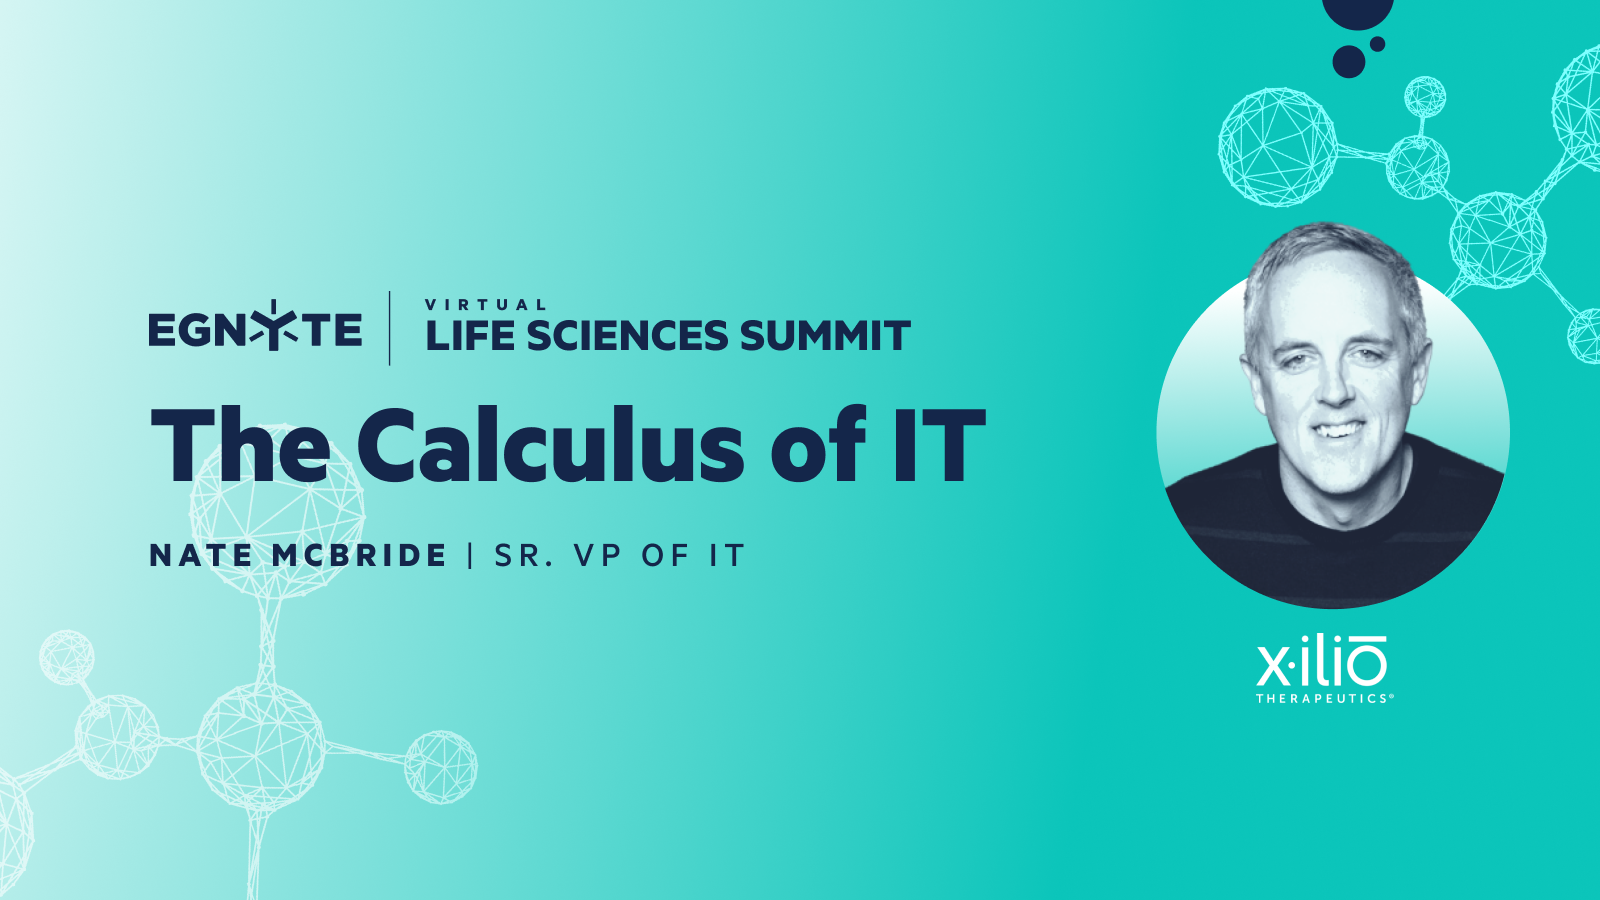 The Calculus of IT - On-Demand Video